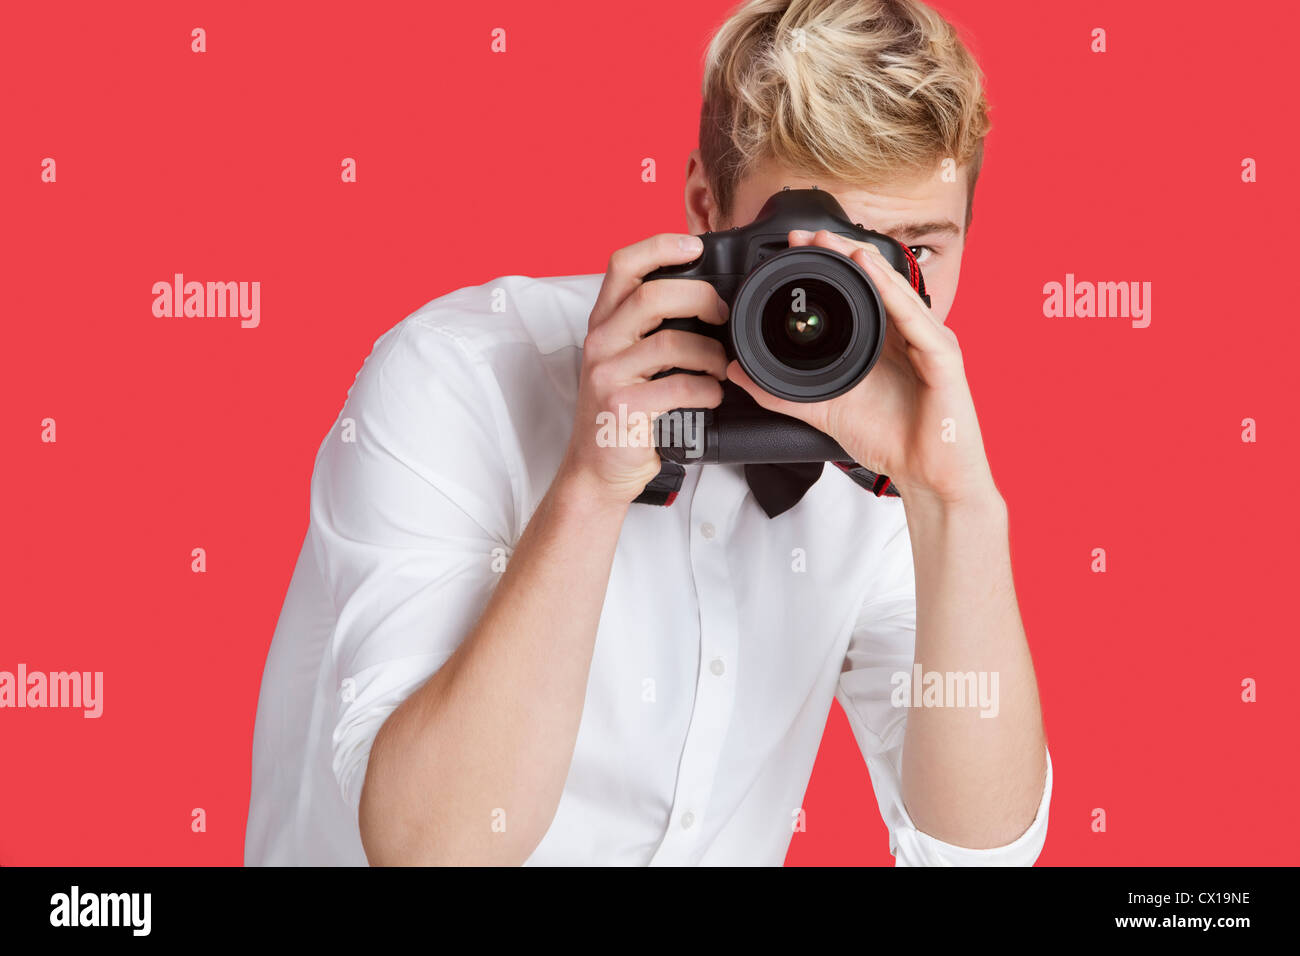 Young man taking picture with digital camera over red background Stock Photo